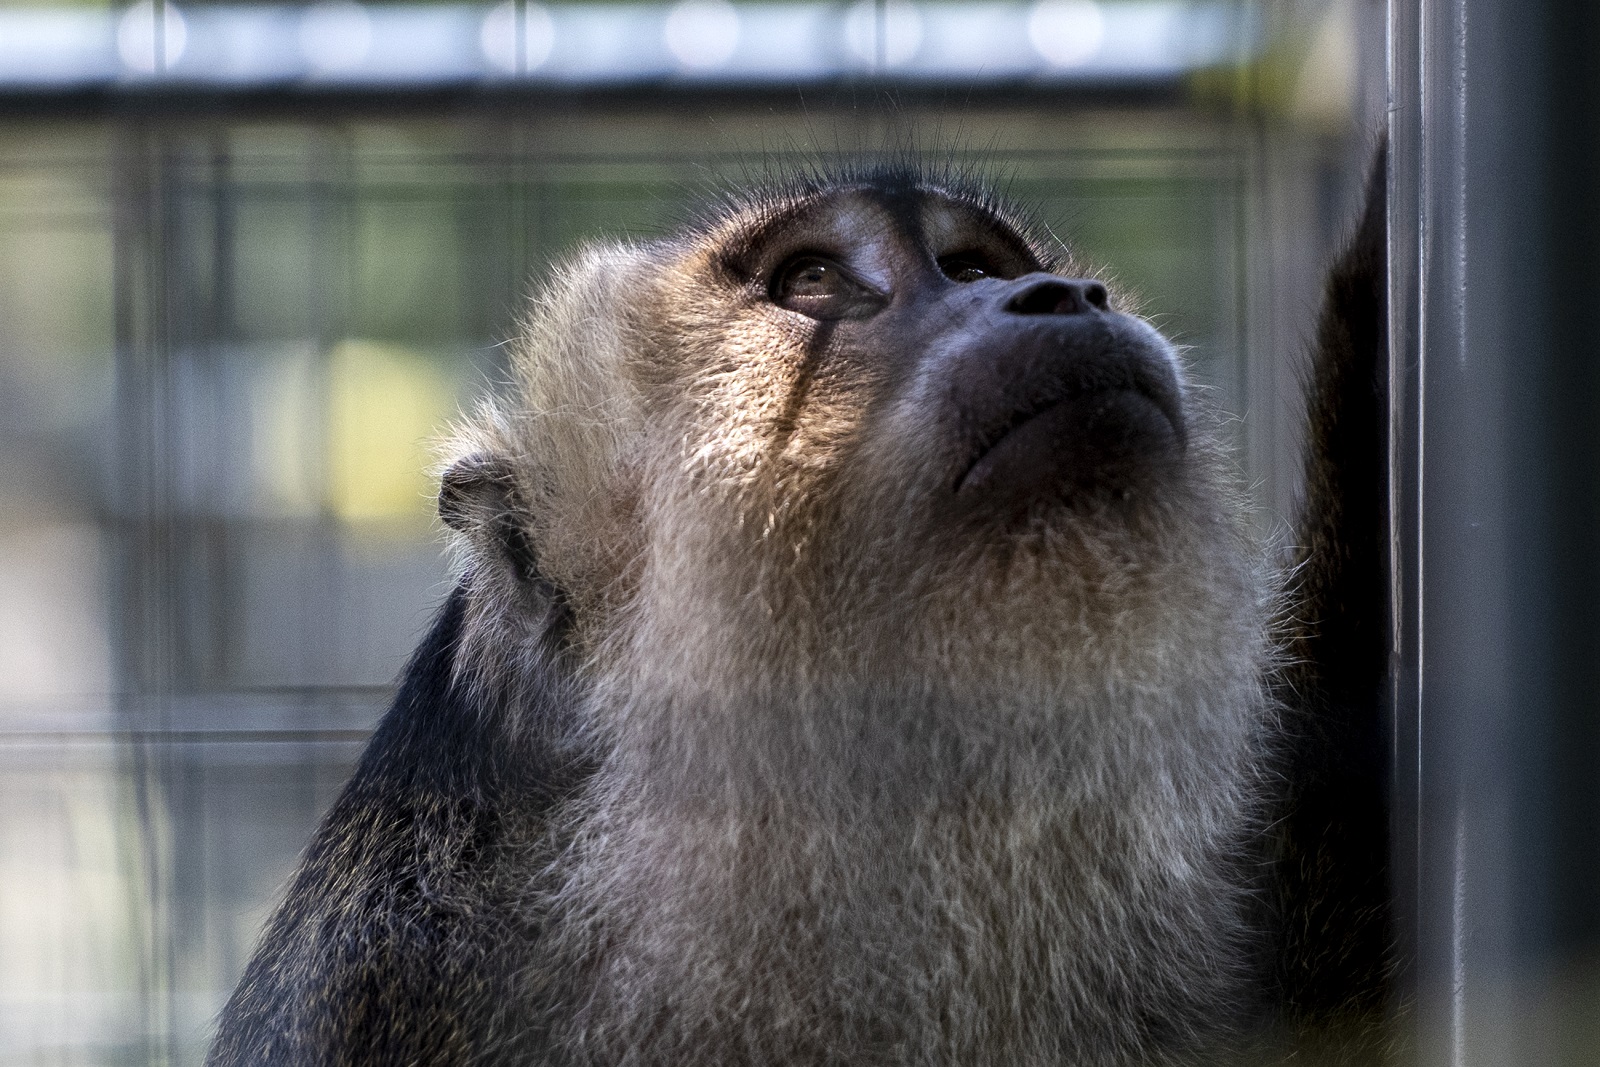 Junior, a hybrid macaque, looks up from inside an enclosure Wednesday, June 30, 2021, at Primates Inc. in Westfield, Wis.